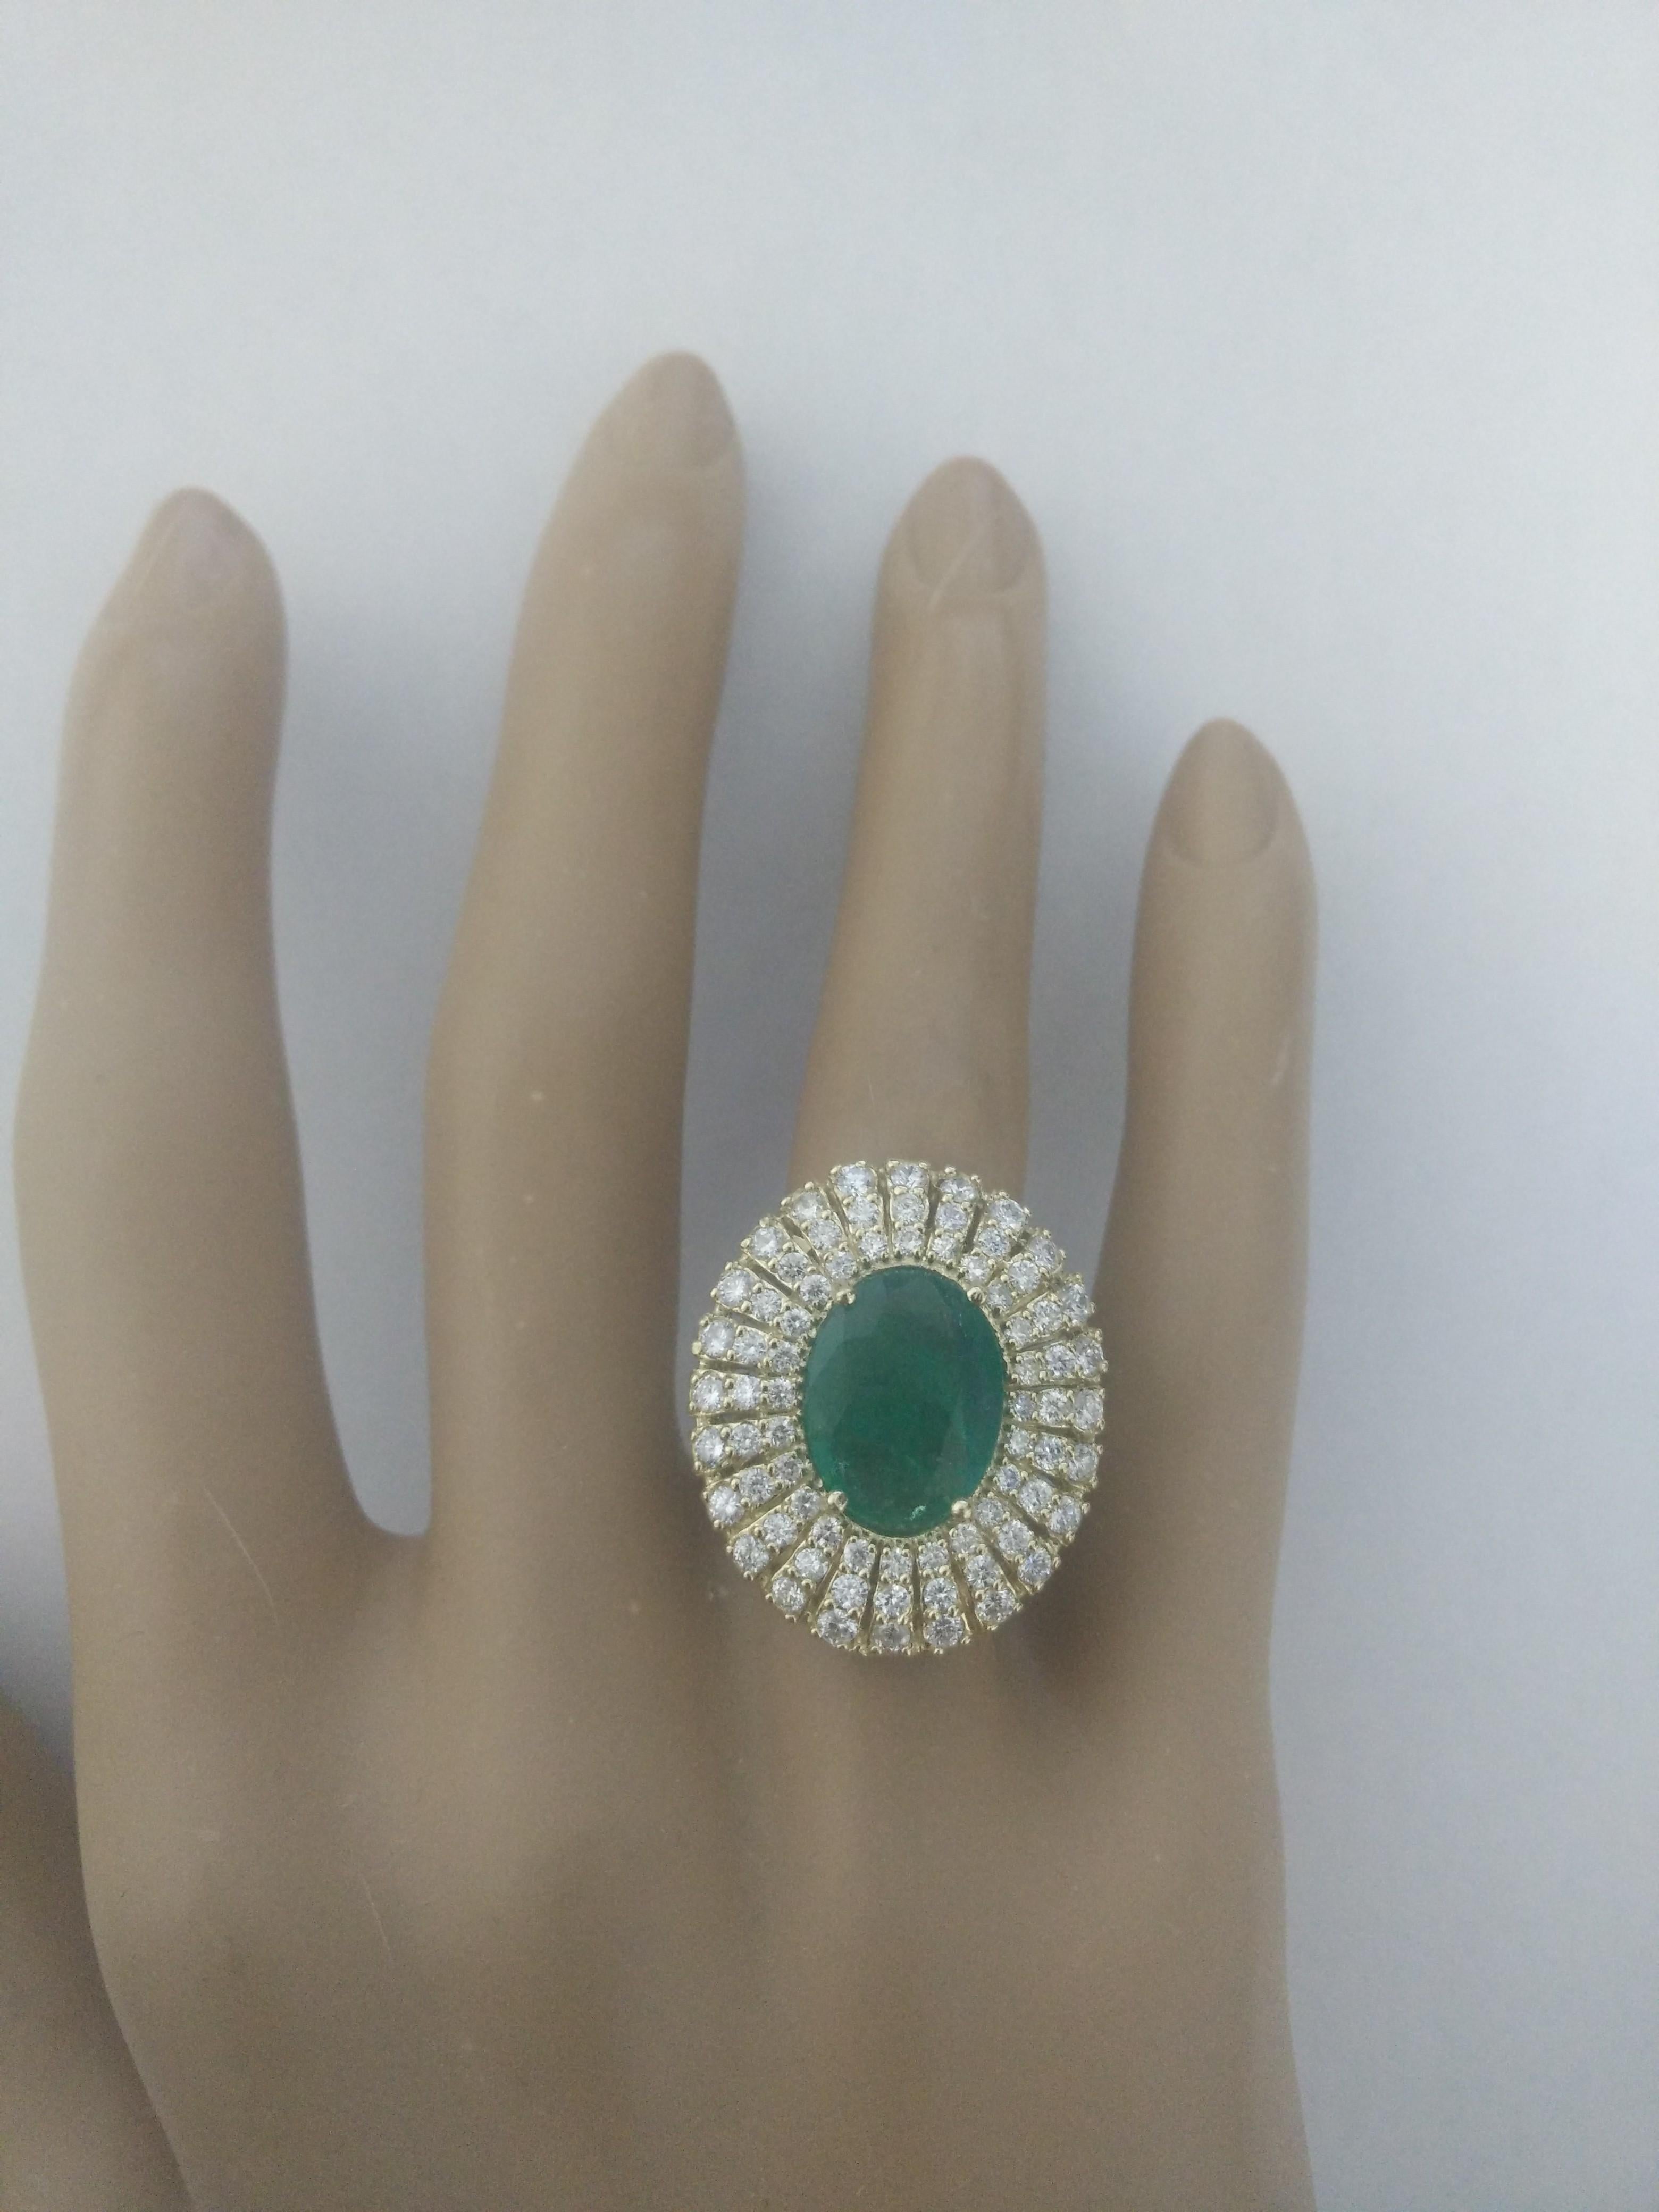 6.94 Carat Natural Emerald 14 Karat Solid Yellow Gold Diamond Ring
Stamped: 14K
Total Ring Weight: 6.5 Grams 
Emerald Weight: 5.34 Carat (12.00x10.00 Millimeters)  
Diamond Weight: 1.60 Carat (F-G Color, VS2-SI1 Clarity )
Face Measures: 25.25x21.75